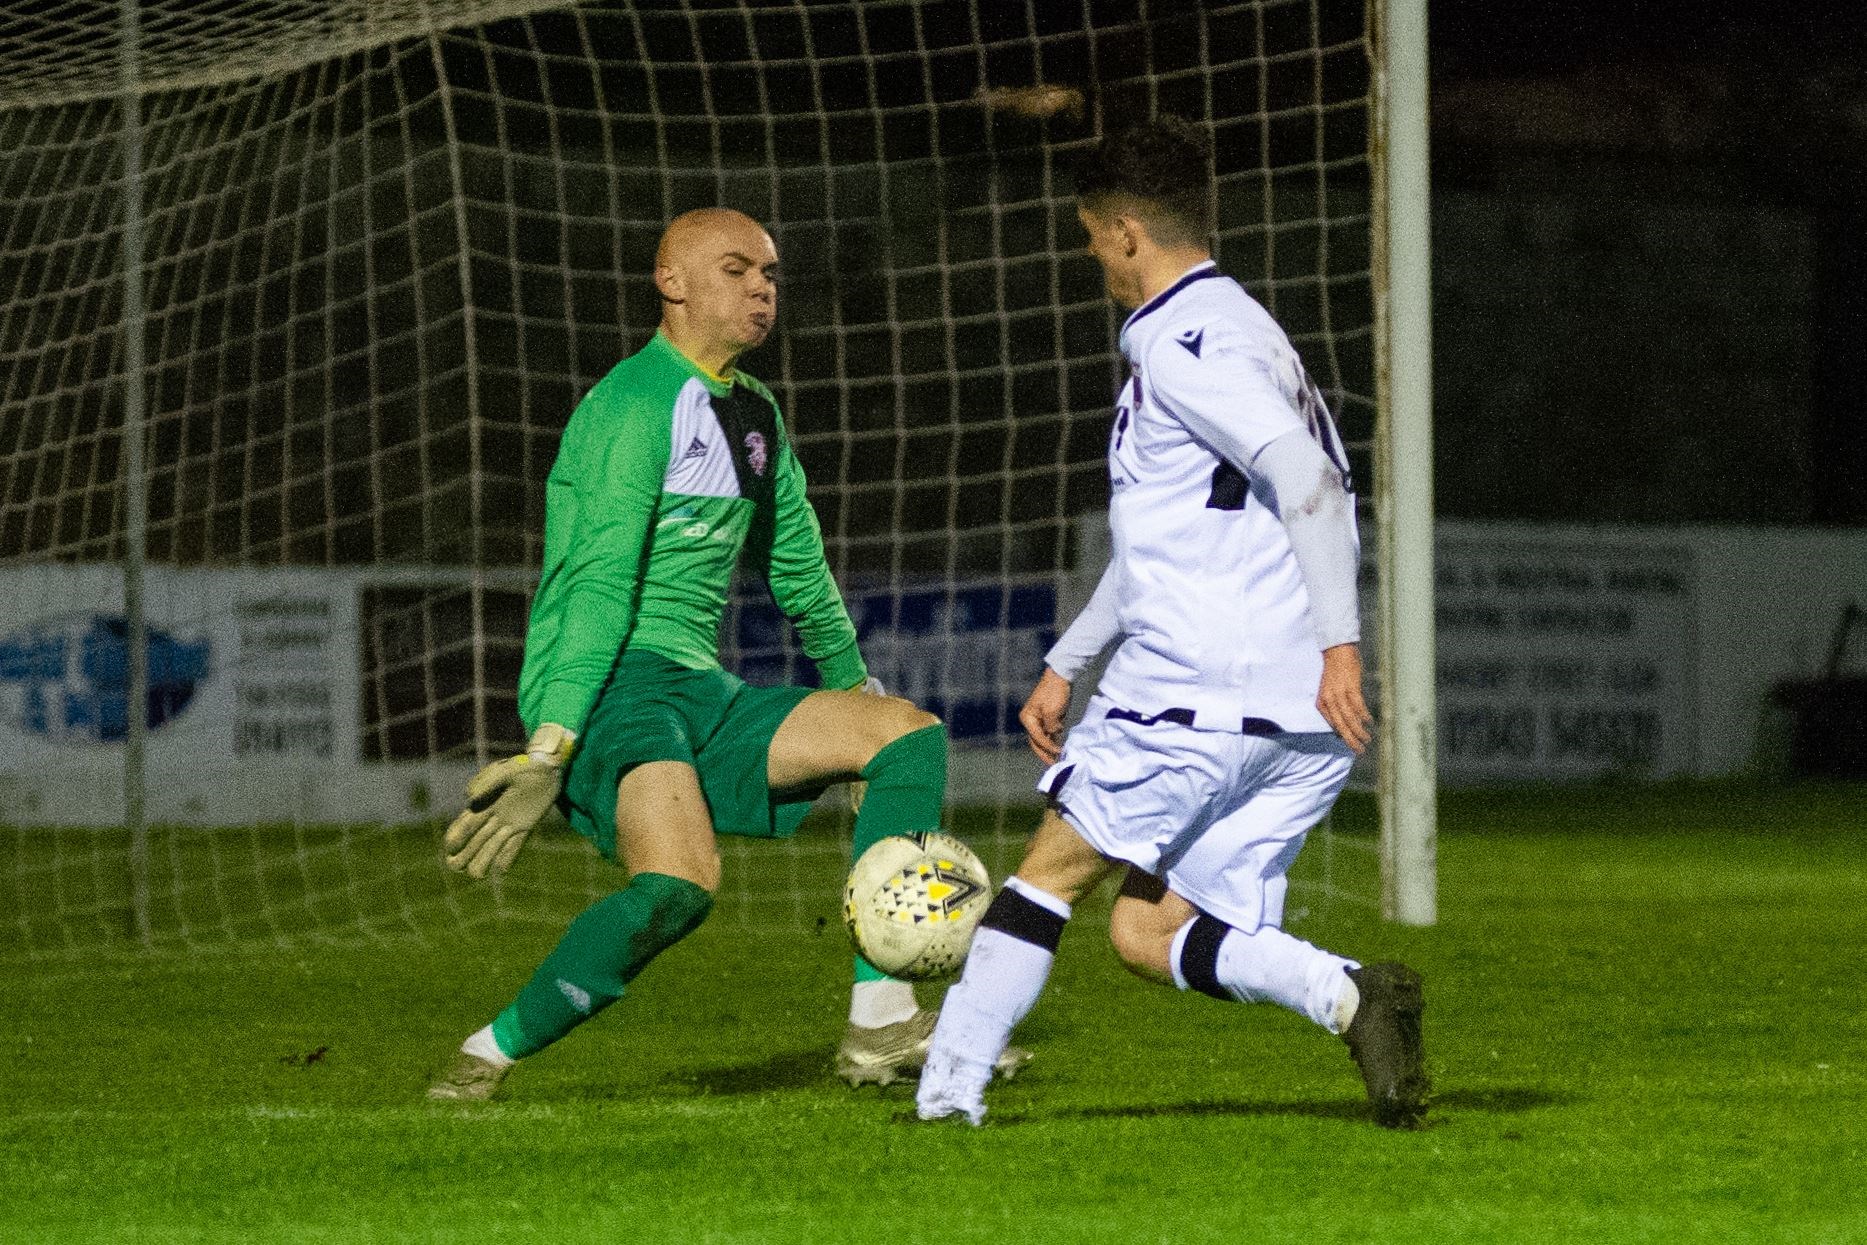 Another save from Lossiemouth keeper Logan Ross as he denies Rothes' Jack Brown.